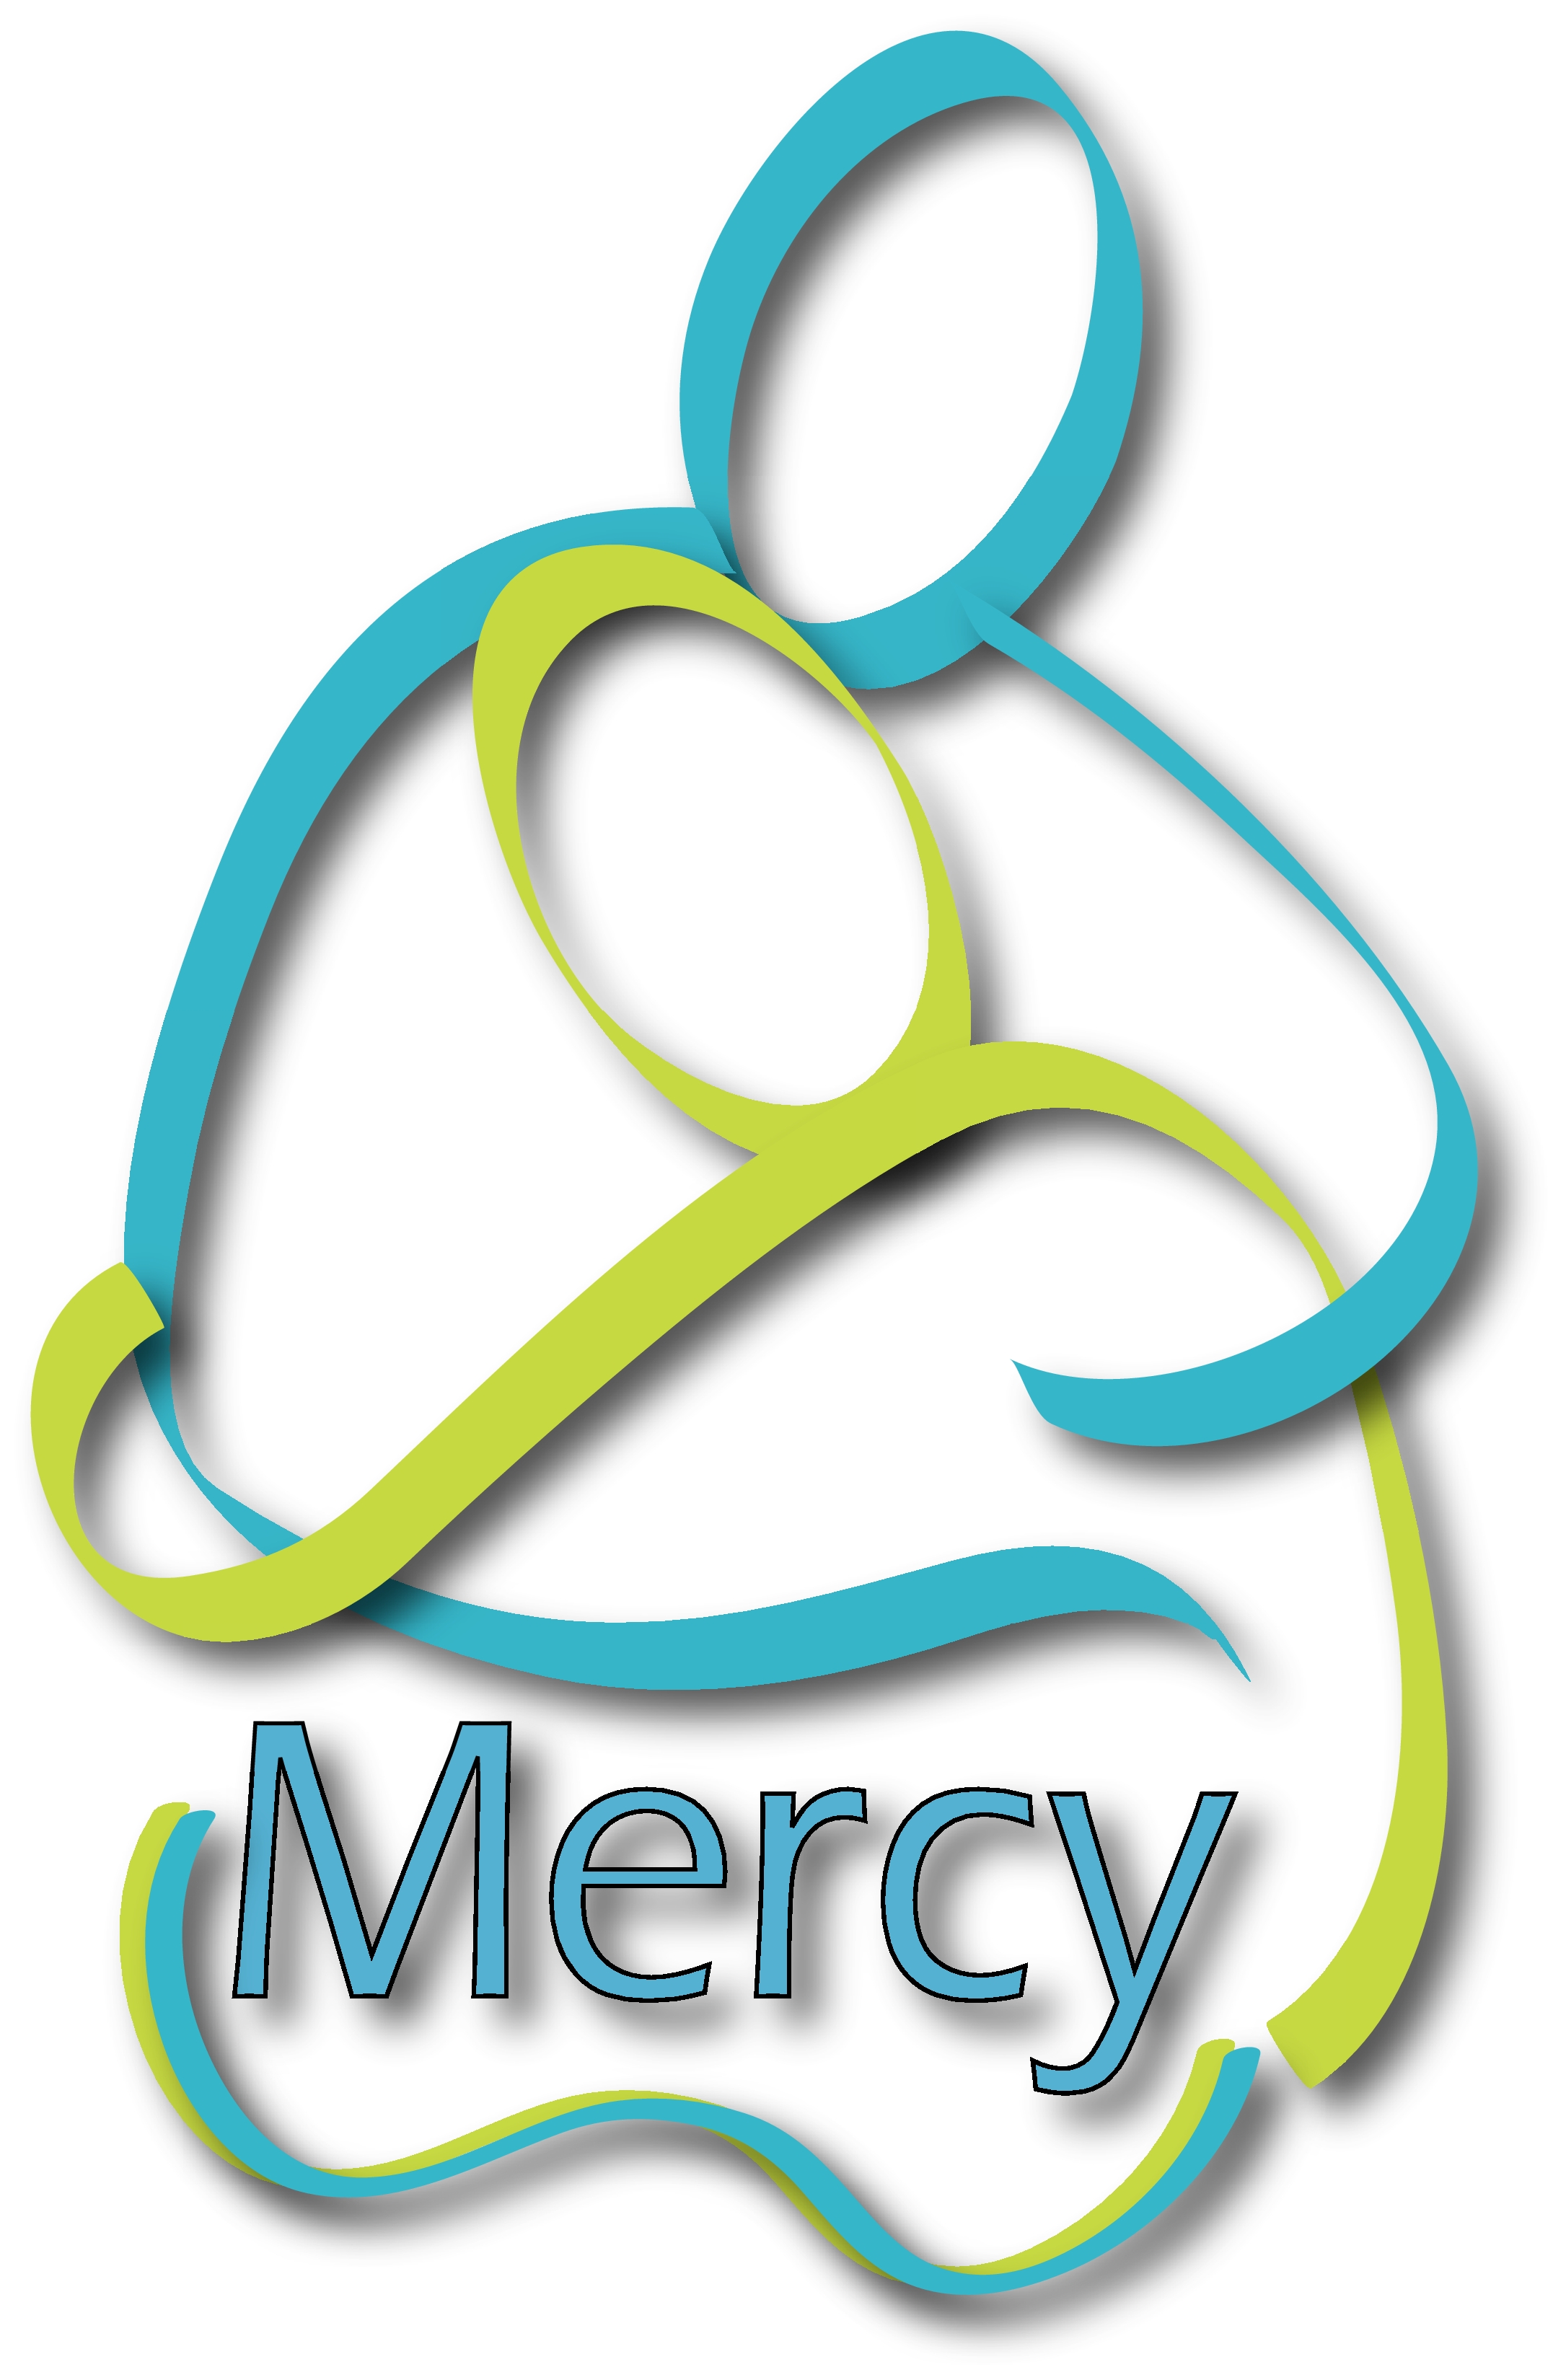 fundraising clipart works mercy